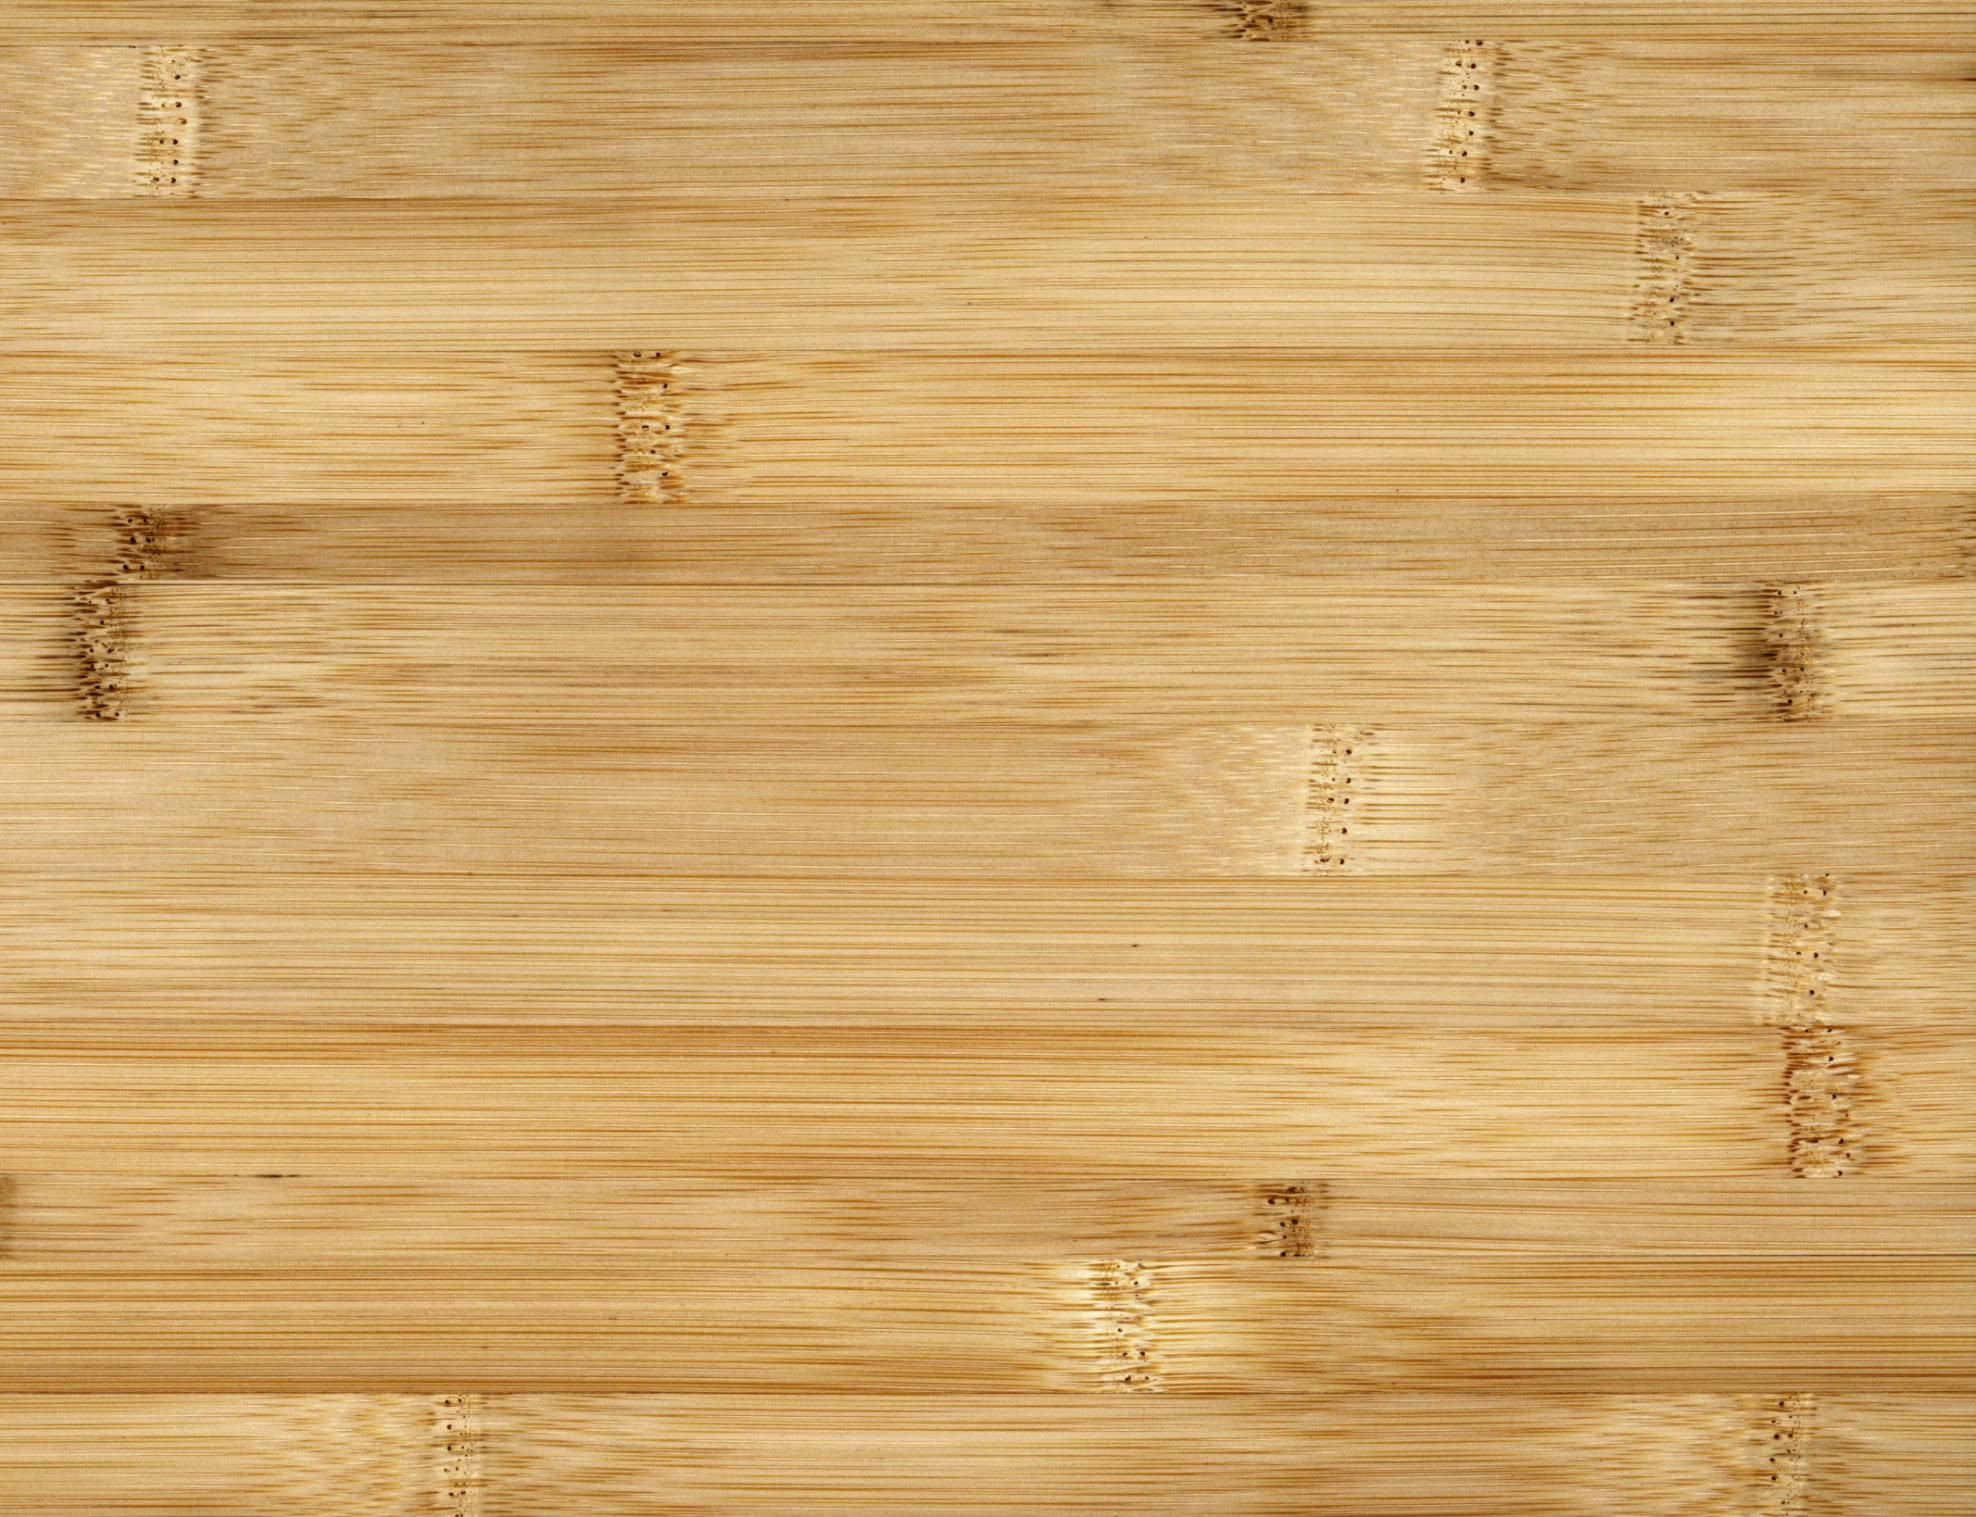 17 Lovable Hardwood Floor Stain Not Drying 2022 free download hardwood floor stain not drying of how to clean bamboo flooring inside 200266305 001 56a2fd815f9b58b7d0d000cd